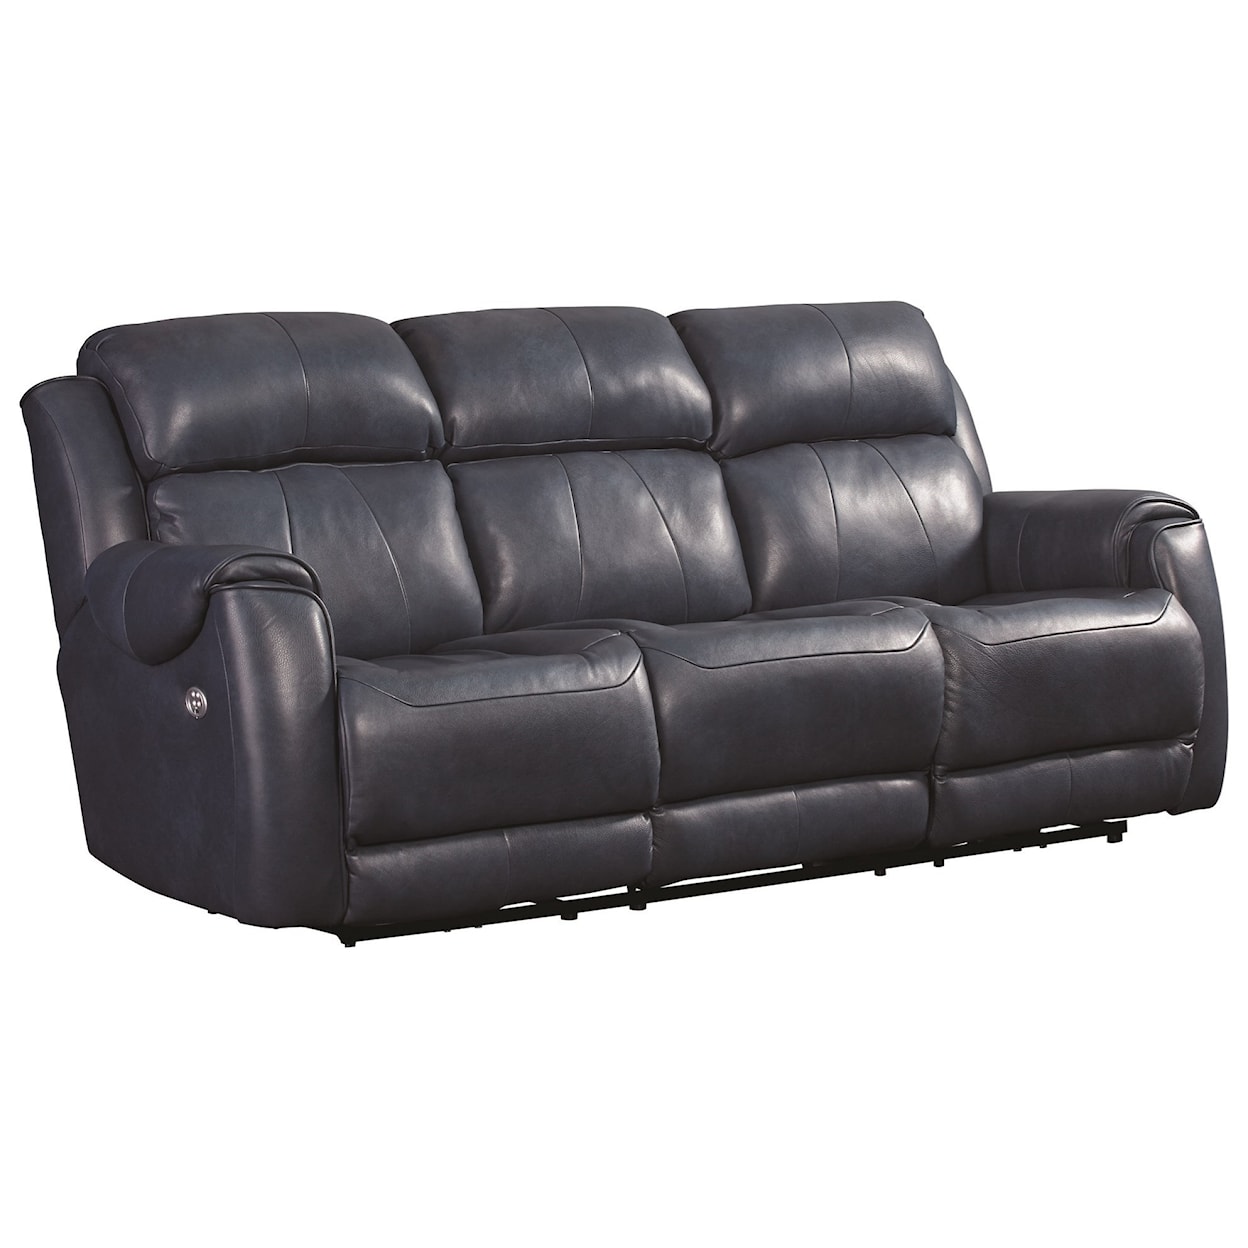 Southern Motion Safe Bet Power Double Reclining Sofa